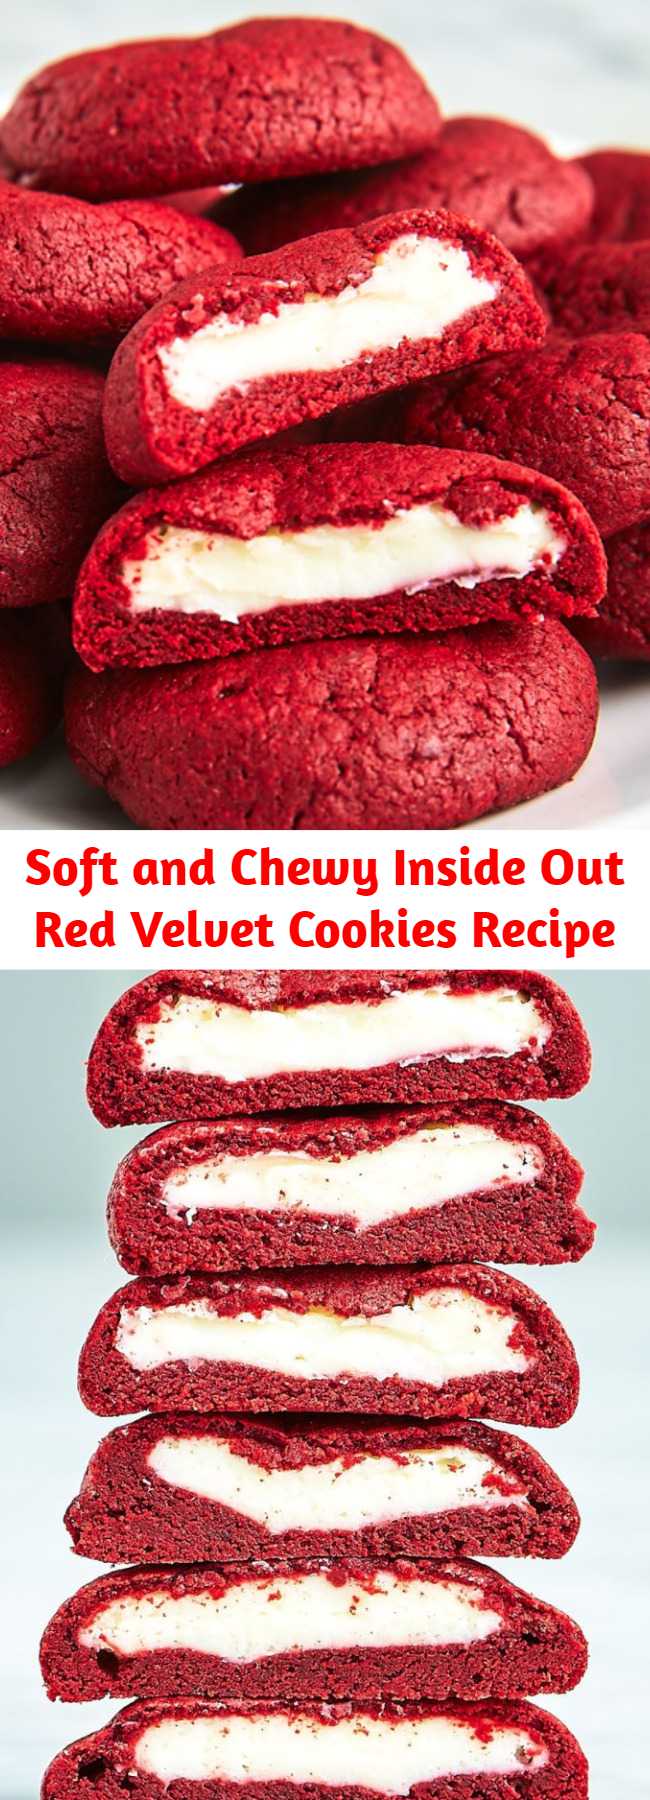 Soft and Chewy Inside Out Red Velvet Cookies Recipe - Get your Red Velvet Cake (frosting and all) in cookie form!  These irresistibly soft and chewy red velvet cookies stuffed with real deal cream cheese frosting, are pretty amazing!